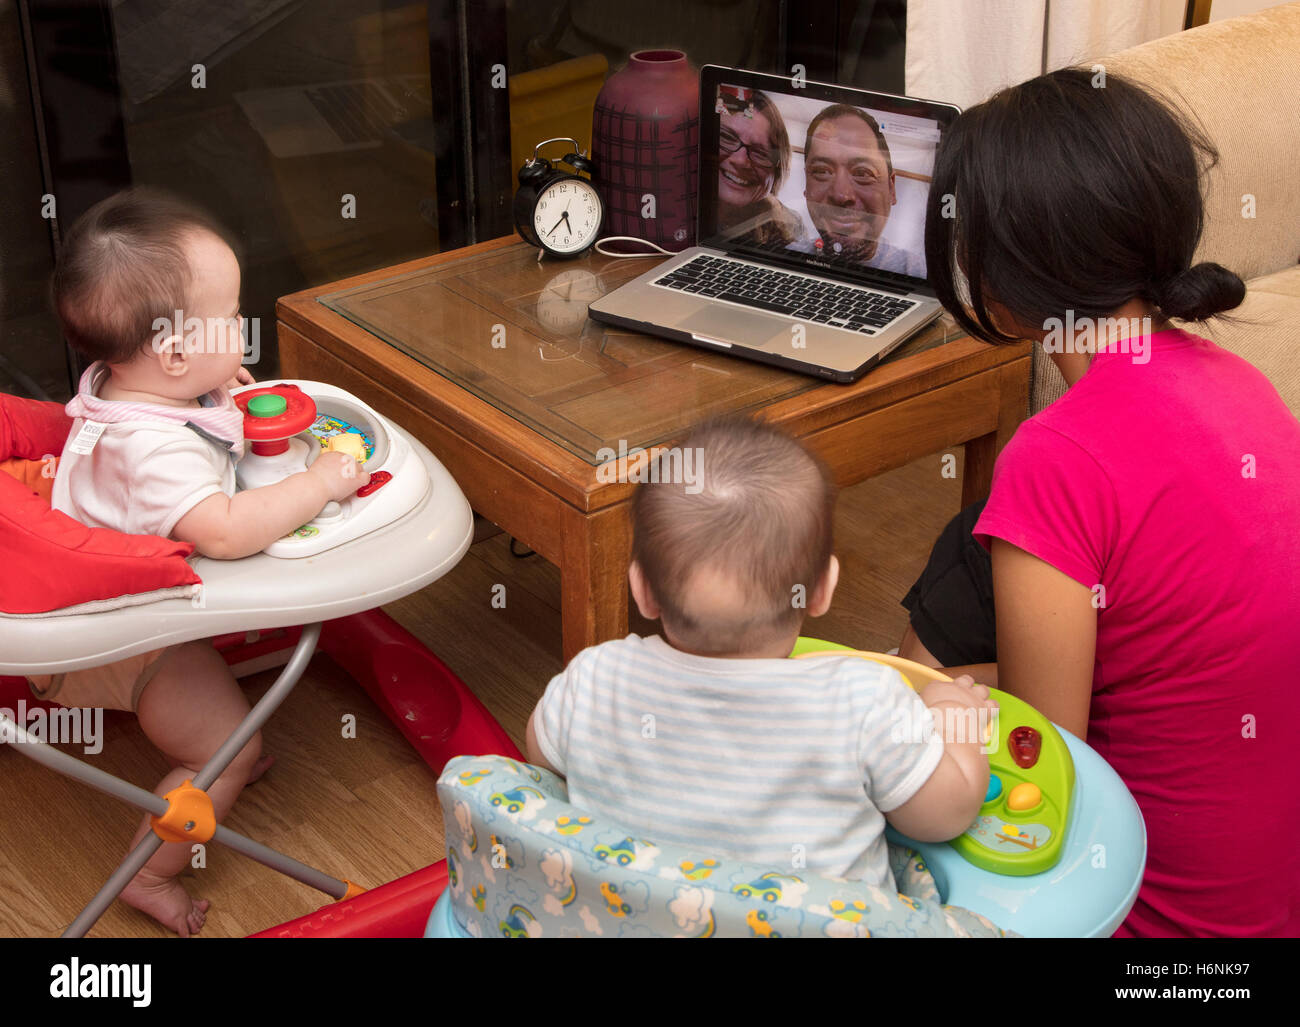 twin babies and mother watching grandparents on Skype on laptop computer Stock Photo